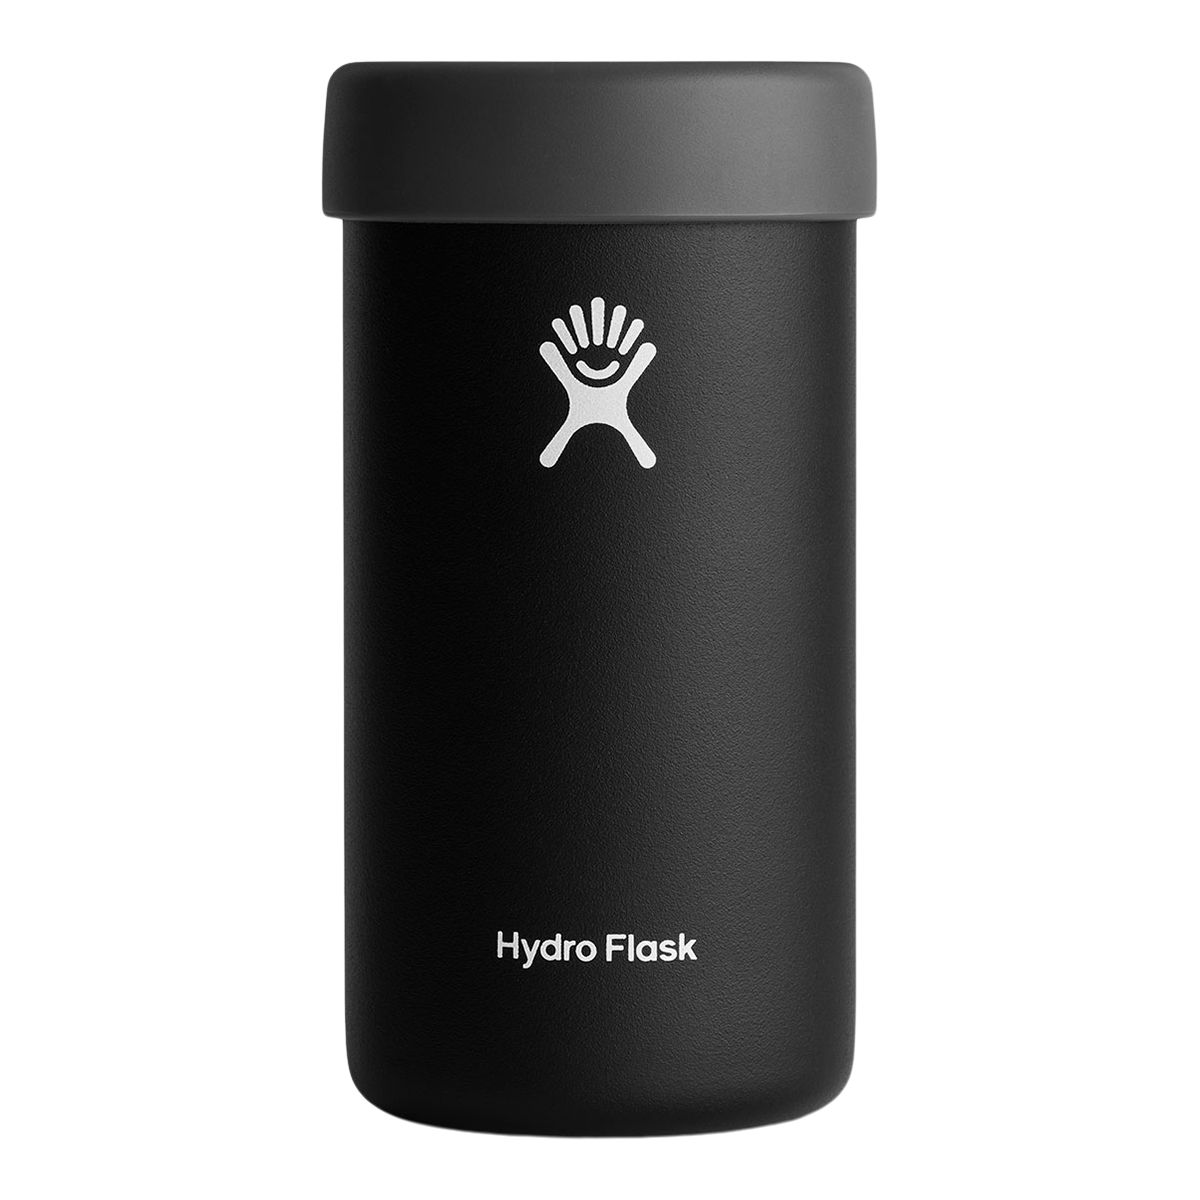 Hydroflask Tallboy 16 oz Can Sleeve/Koozie or Cup  Insulated Stainless Steel